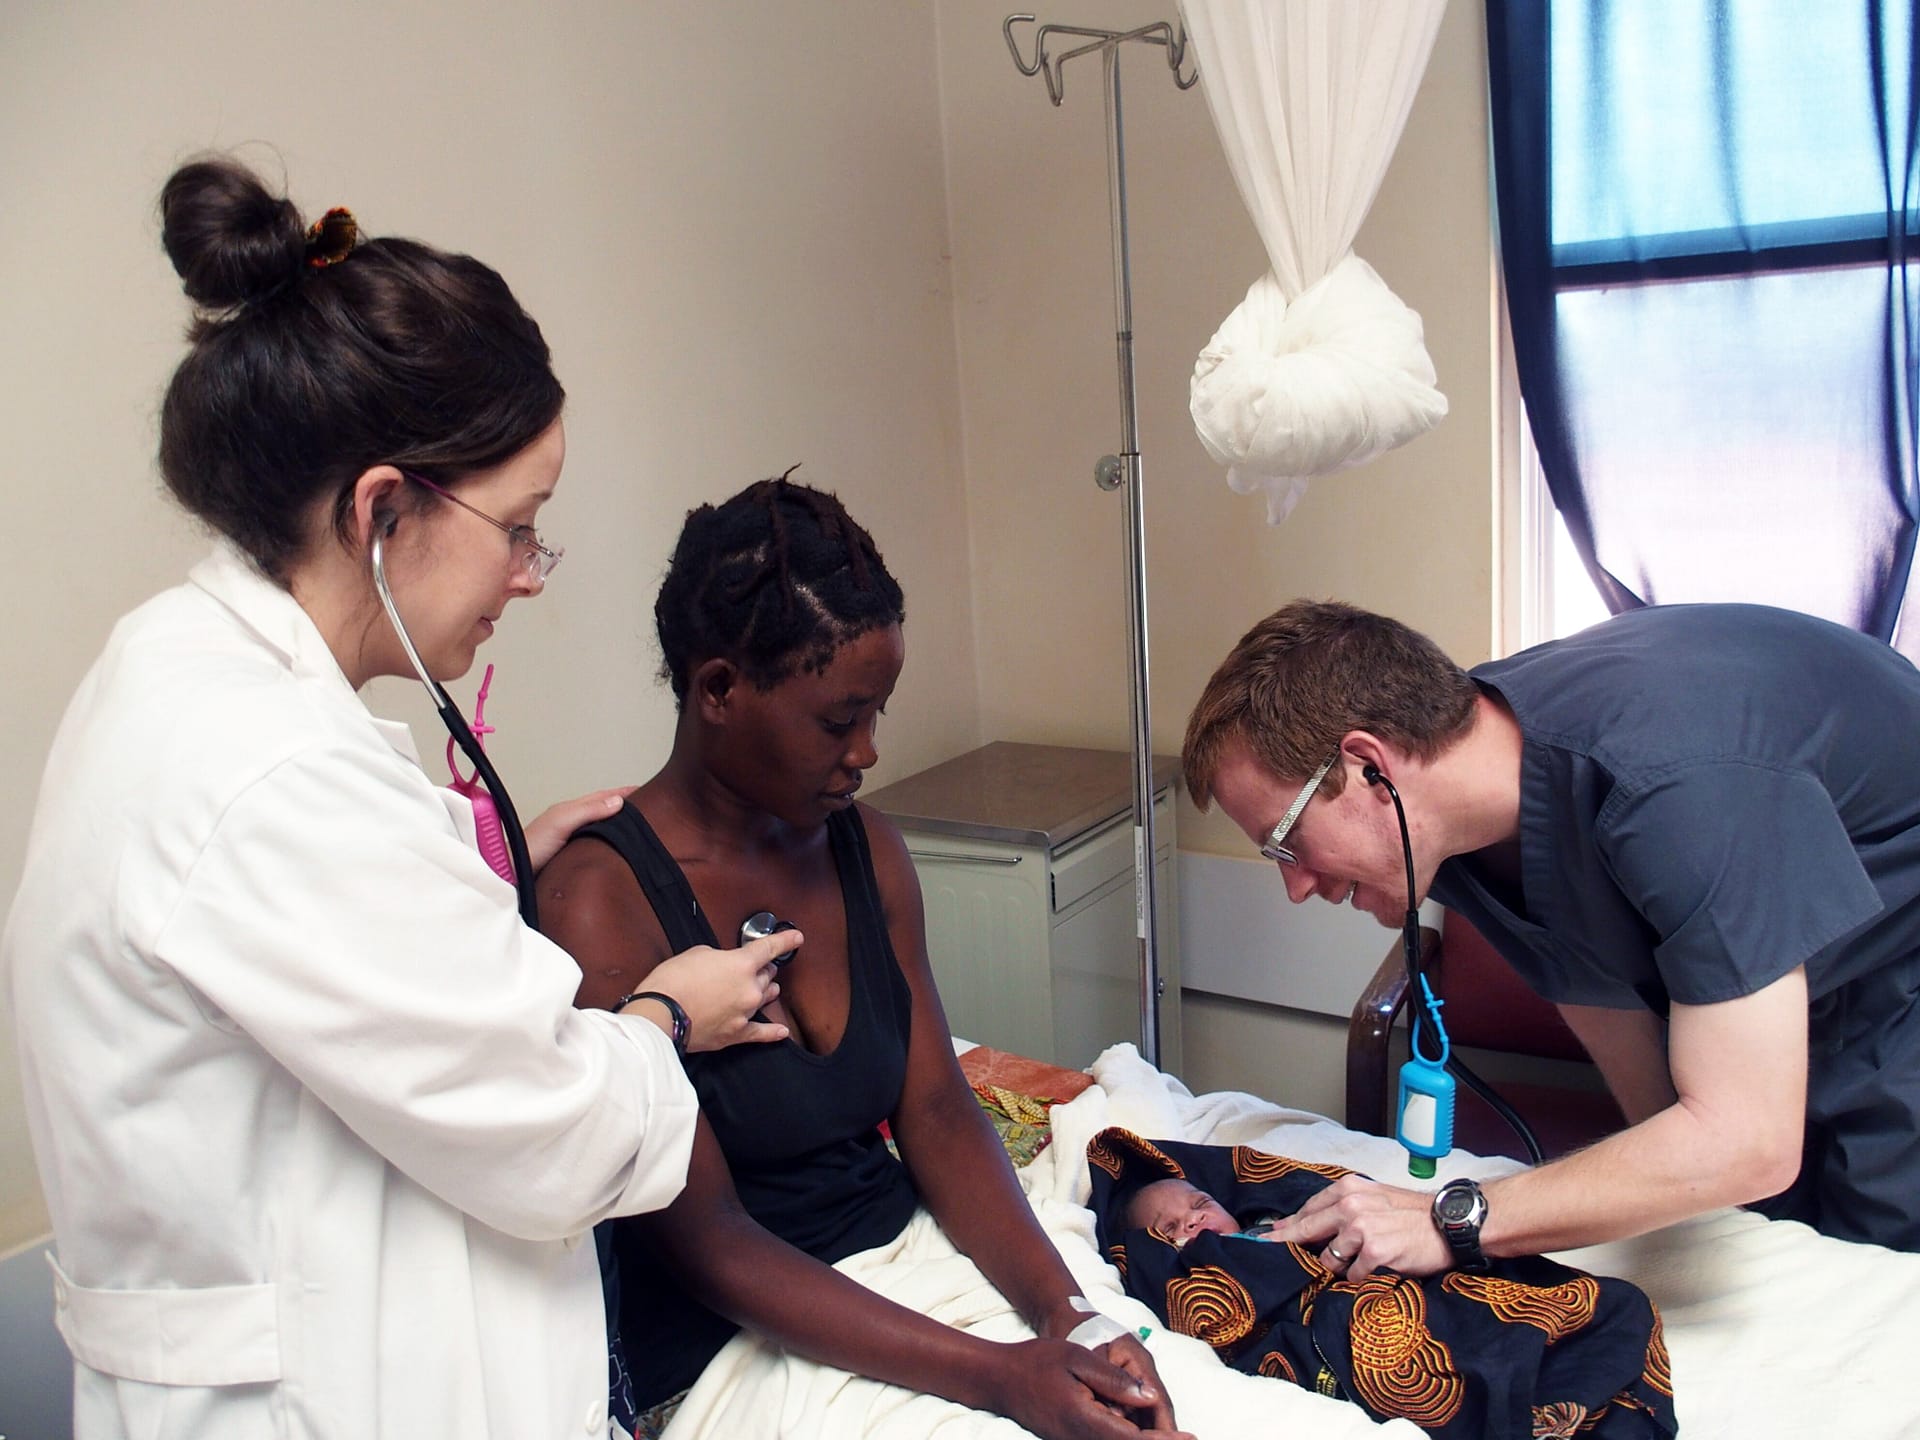 Jared and Jenny Brockington work with Christian Health Service Corps as medical missionaries.